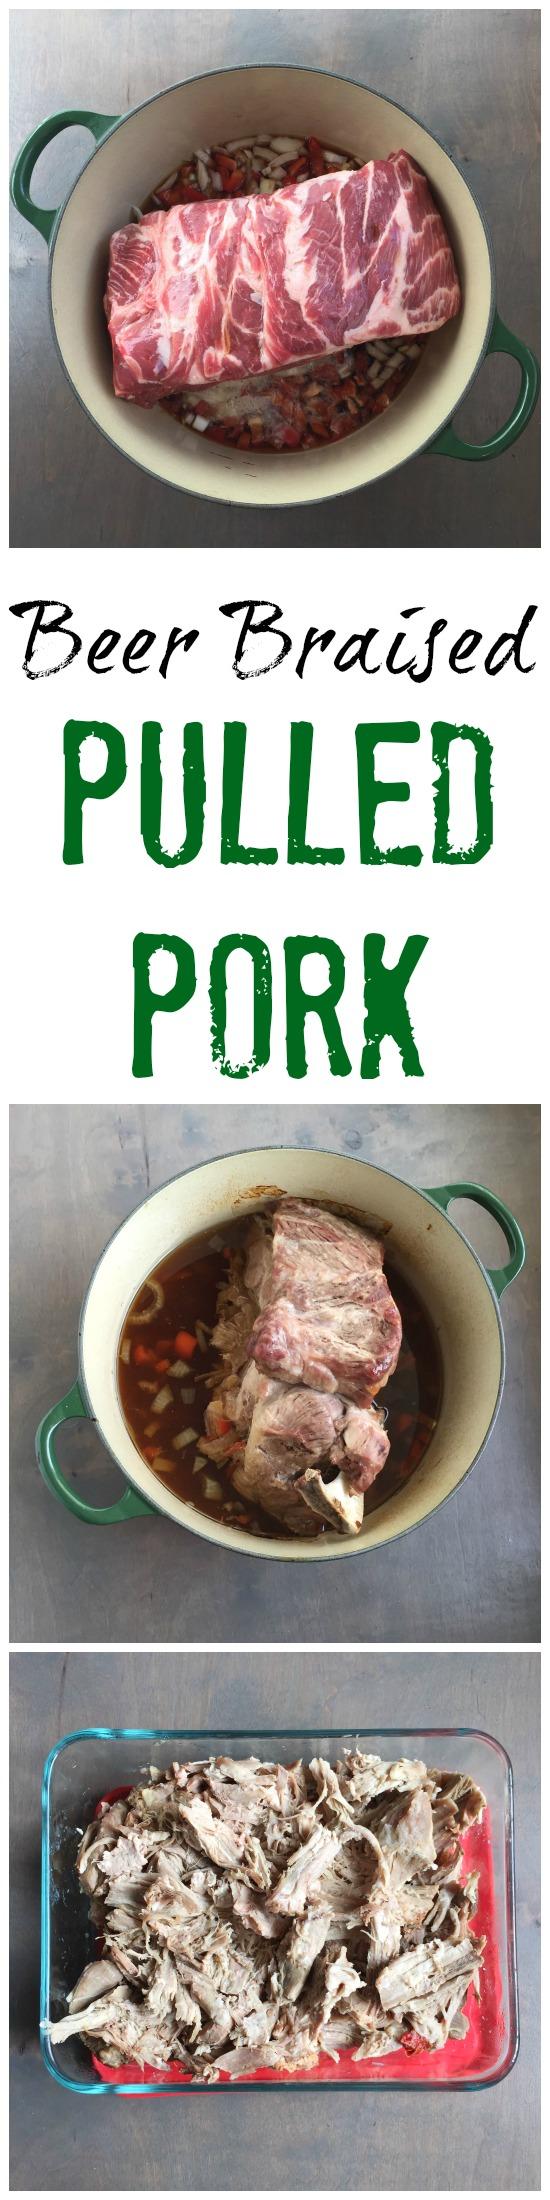 Slow cooked in the oven, this beer braised pulled pork is juicy and flavorful!